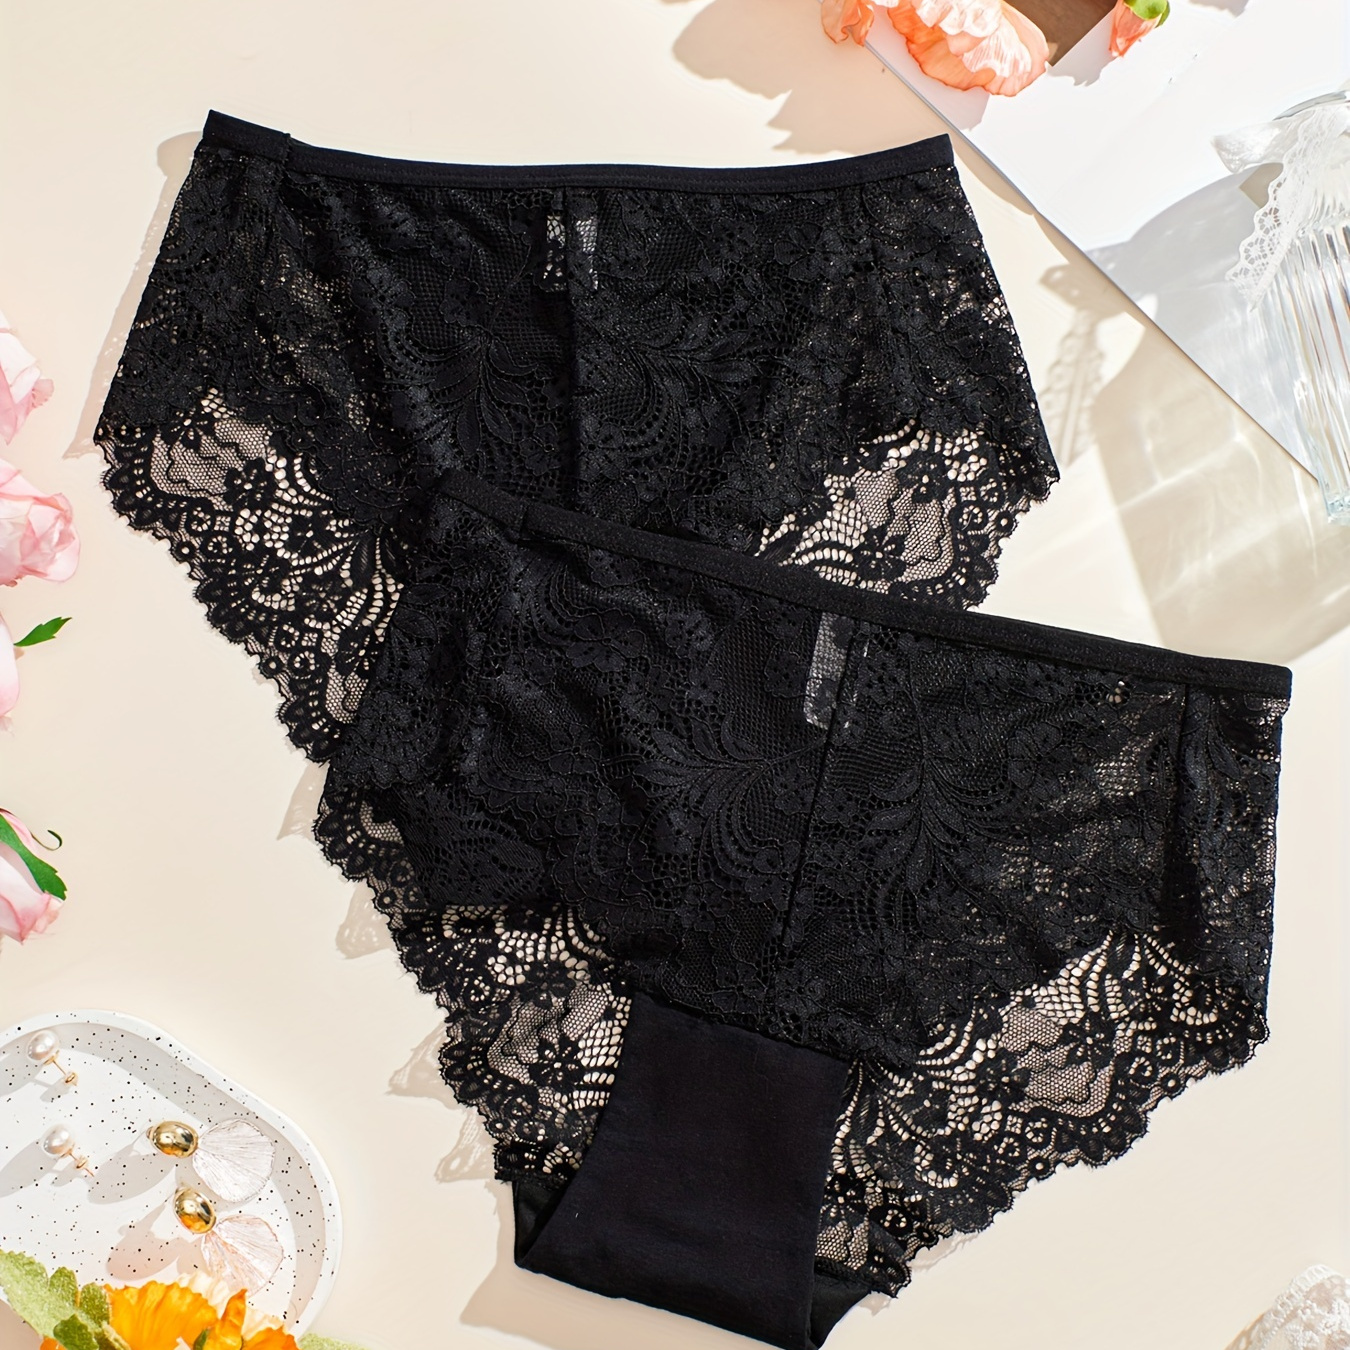 

2pcs Solid Floral Lace Semi Sheer Briefs, Elegant Comfy Breathable Stretchy Intimates Panties, Women's Lingerie & Underwear